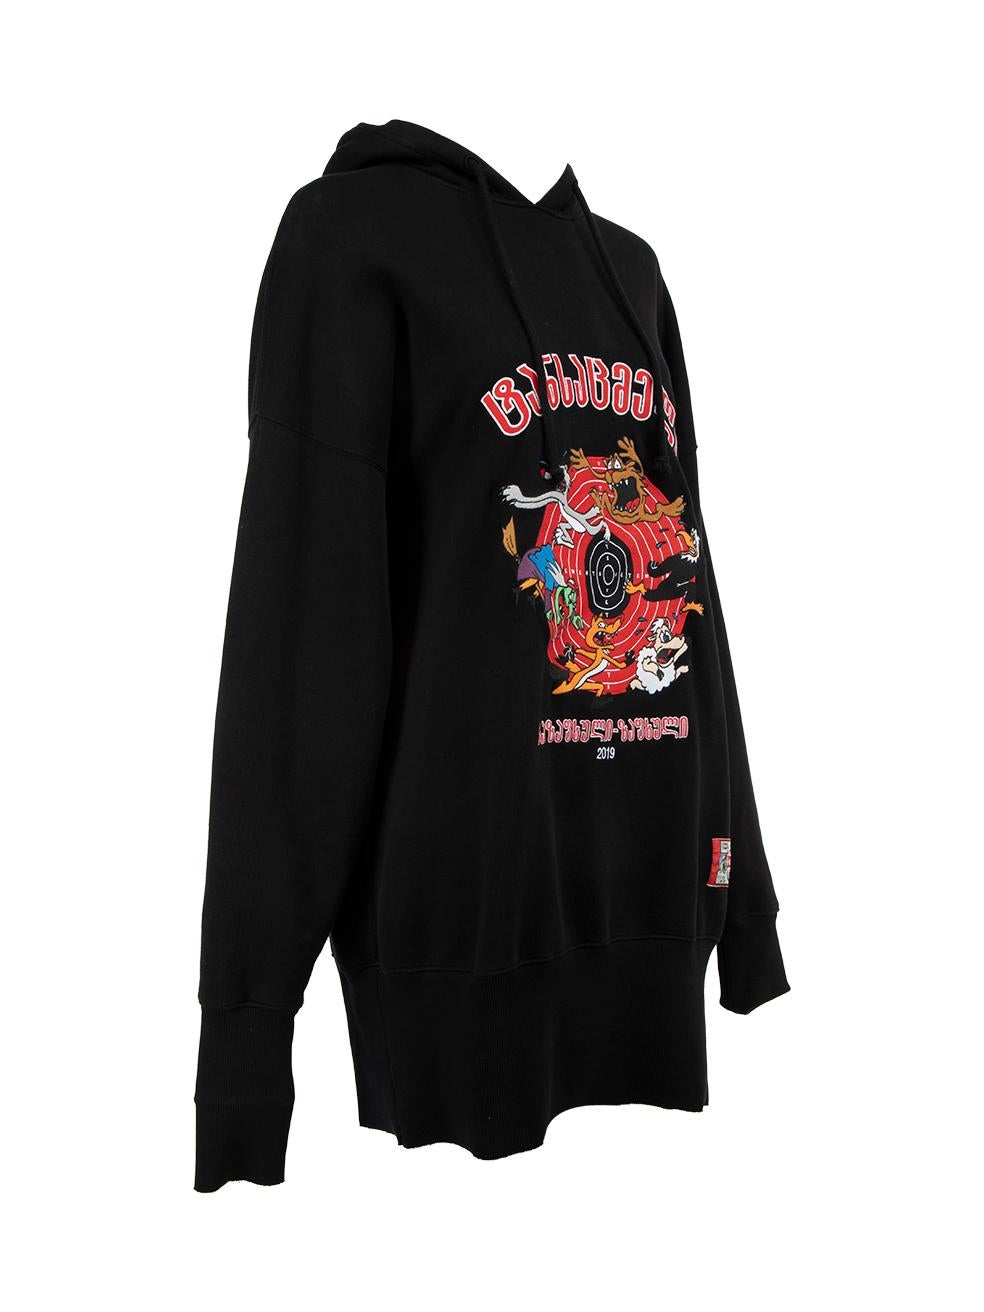 CONDITION is Very good. Hardly any visible wear to hoodie is evident on this used Vetements designer resale item. Details Multicolour- Black and red Cotton Hoodie Unisex Oversized Long sleeves Folded long cuffs Drawstring hood VETEMENTS PRINTEMPS-